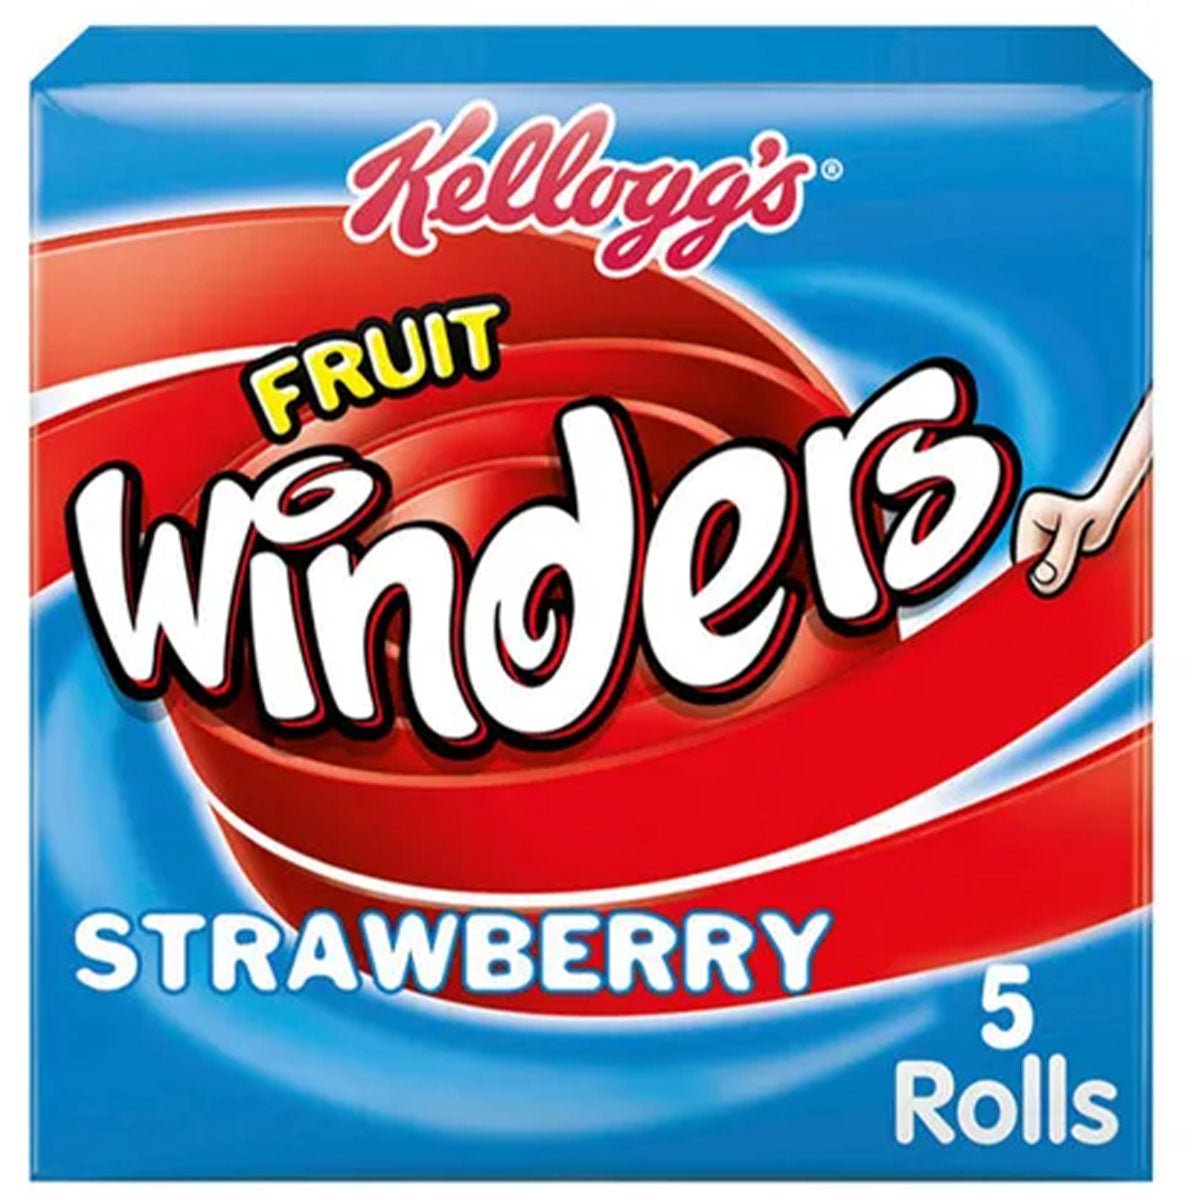 Kellogg's - Fruit Winders Strawberry Snack - 5 x 17g - Continental Food Store